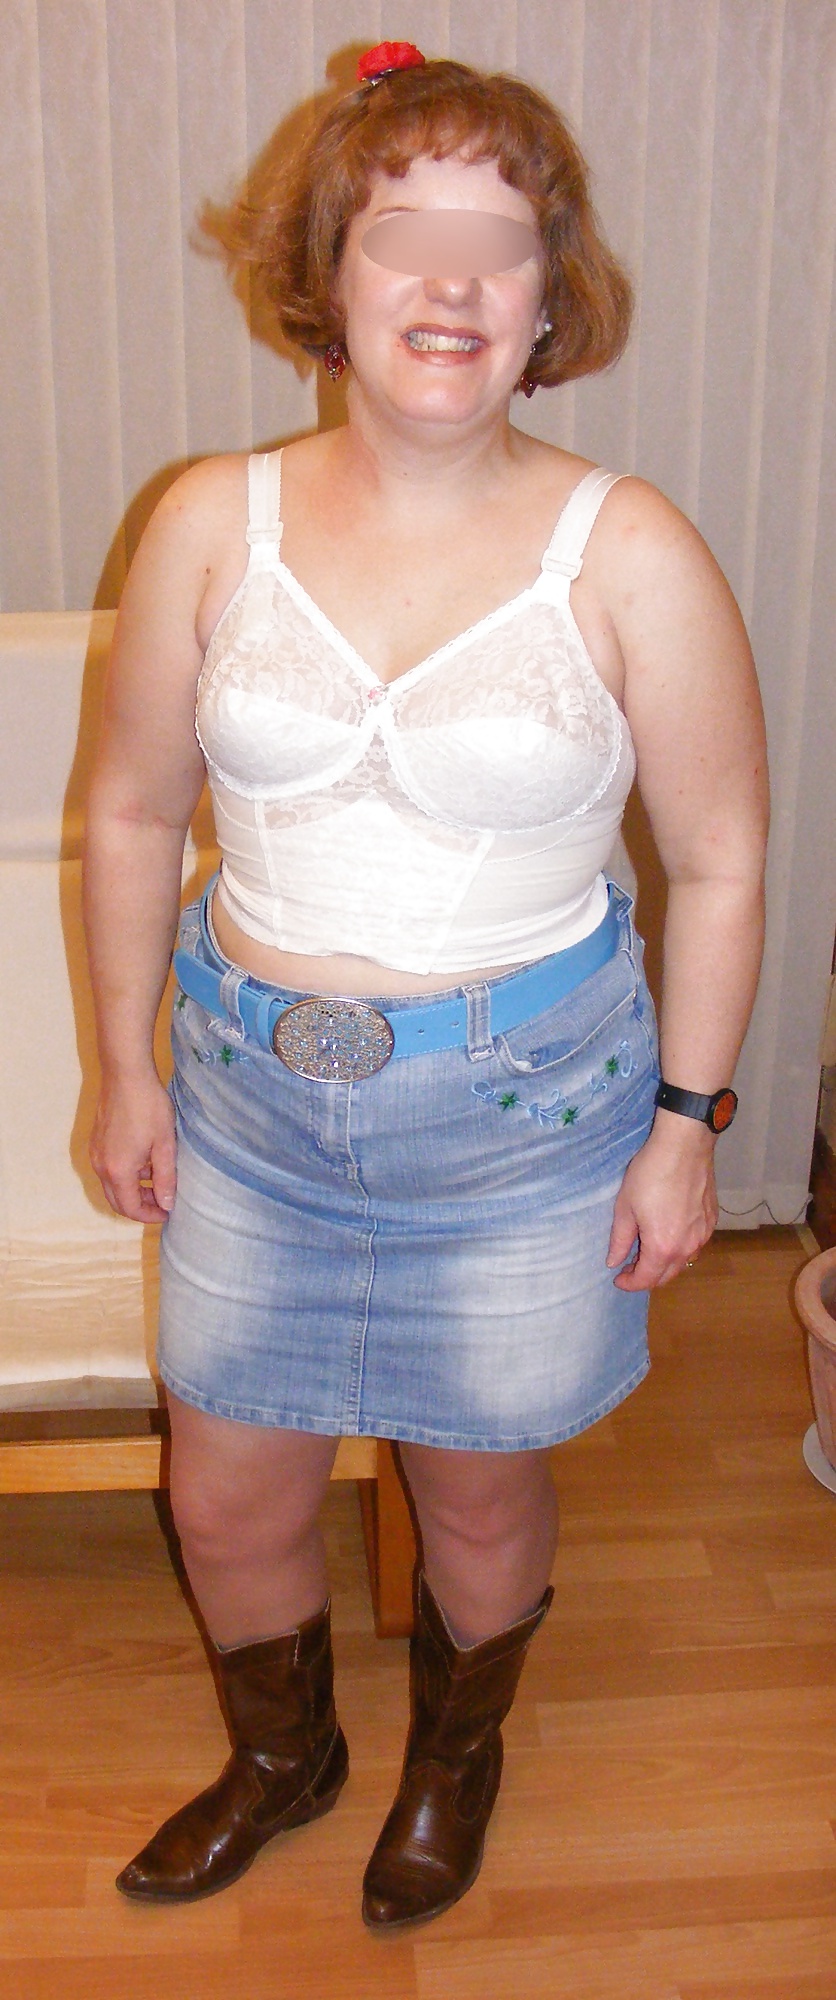 Porn Pics Tights, denim skirt, and big white knickers